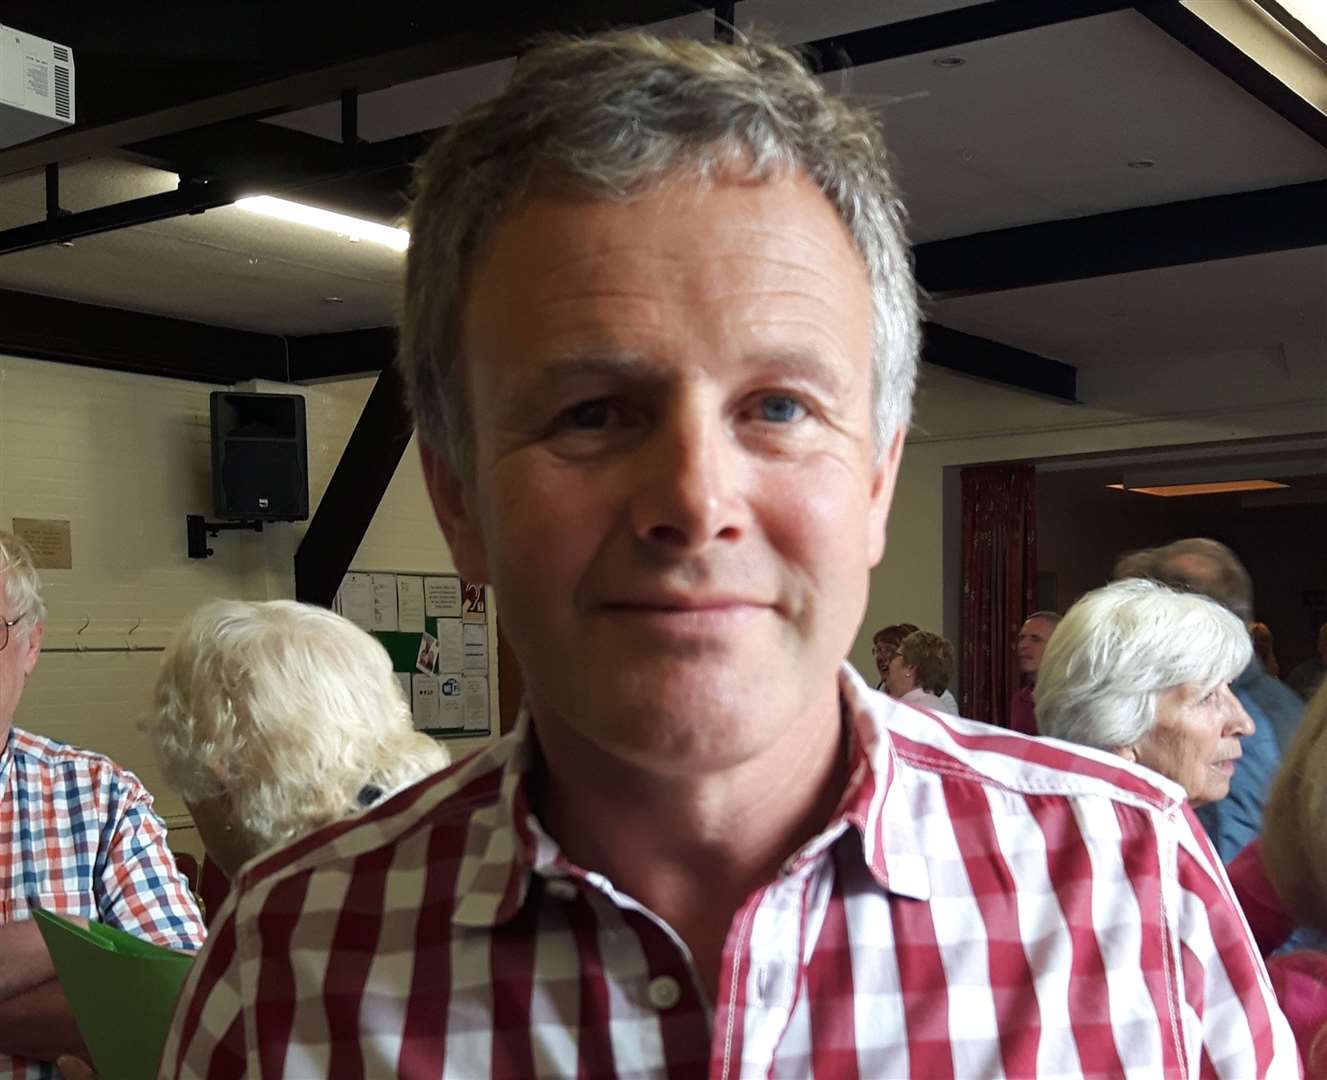 Cllr Nick Kenton, Dover District Council's cabinet member for planning and environment